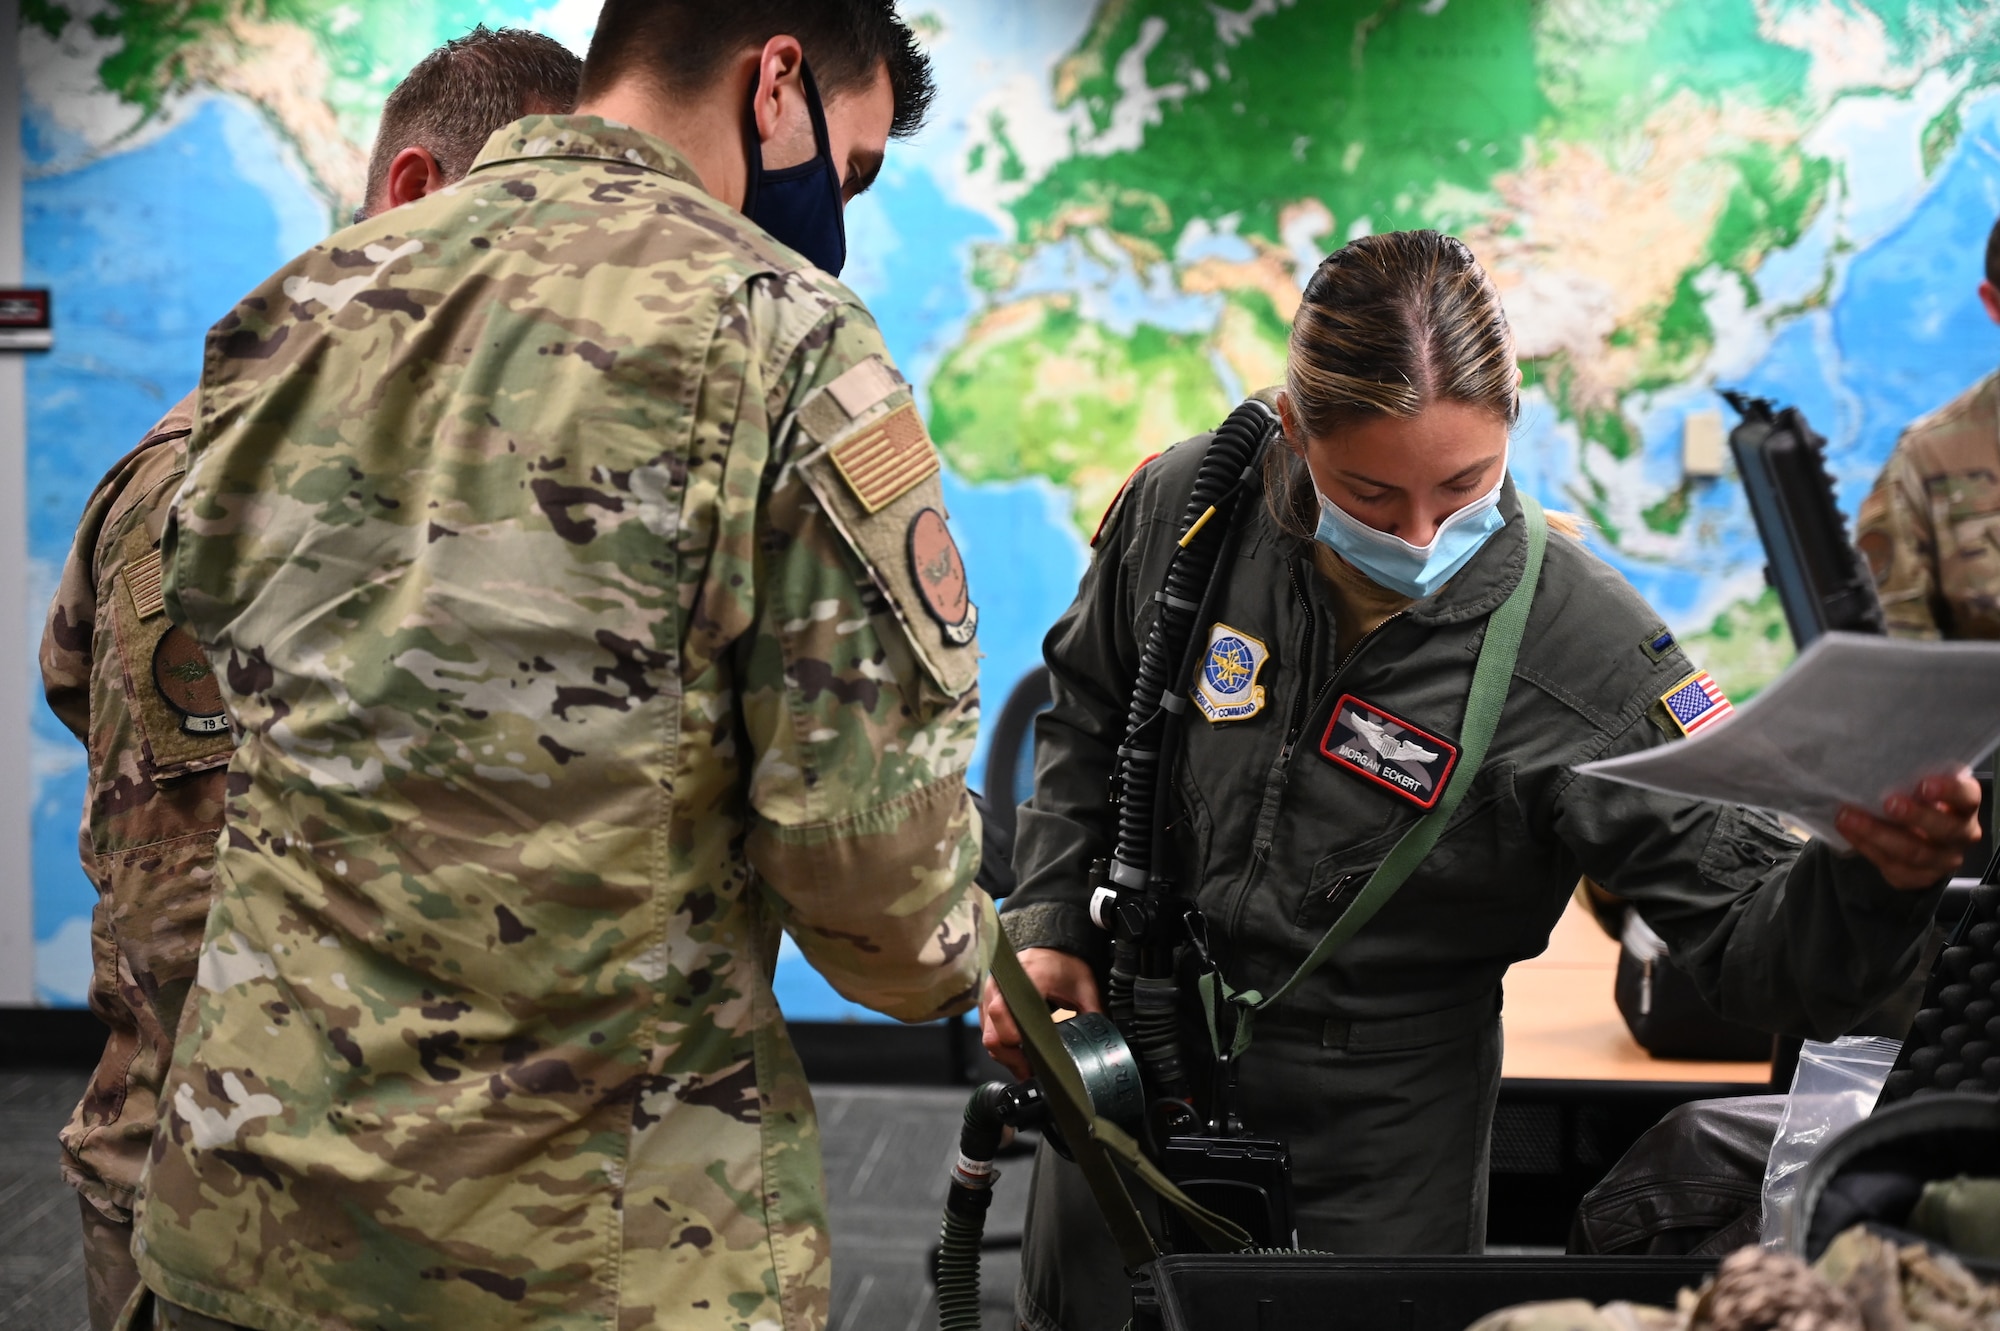 Pilots prepare gear in a room before heading to a C-130J.